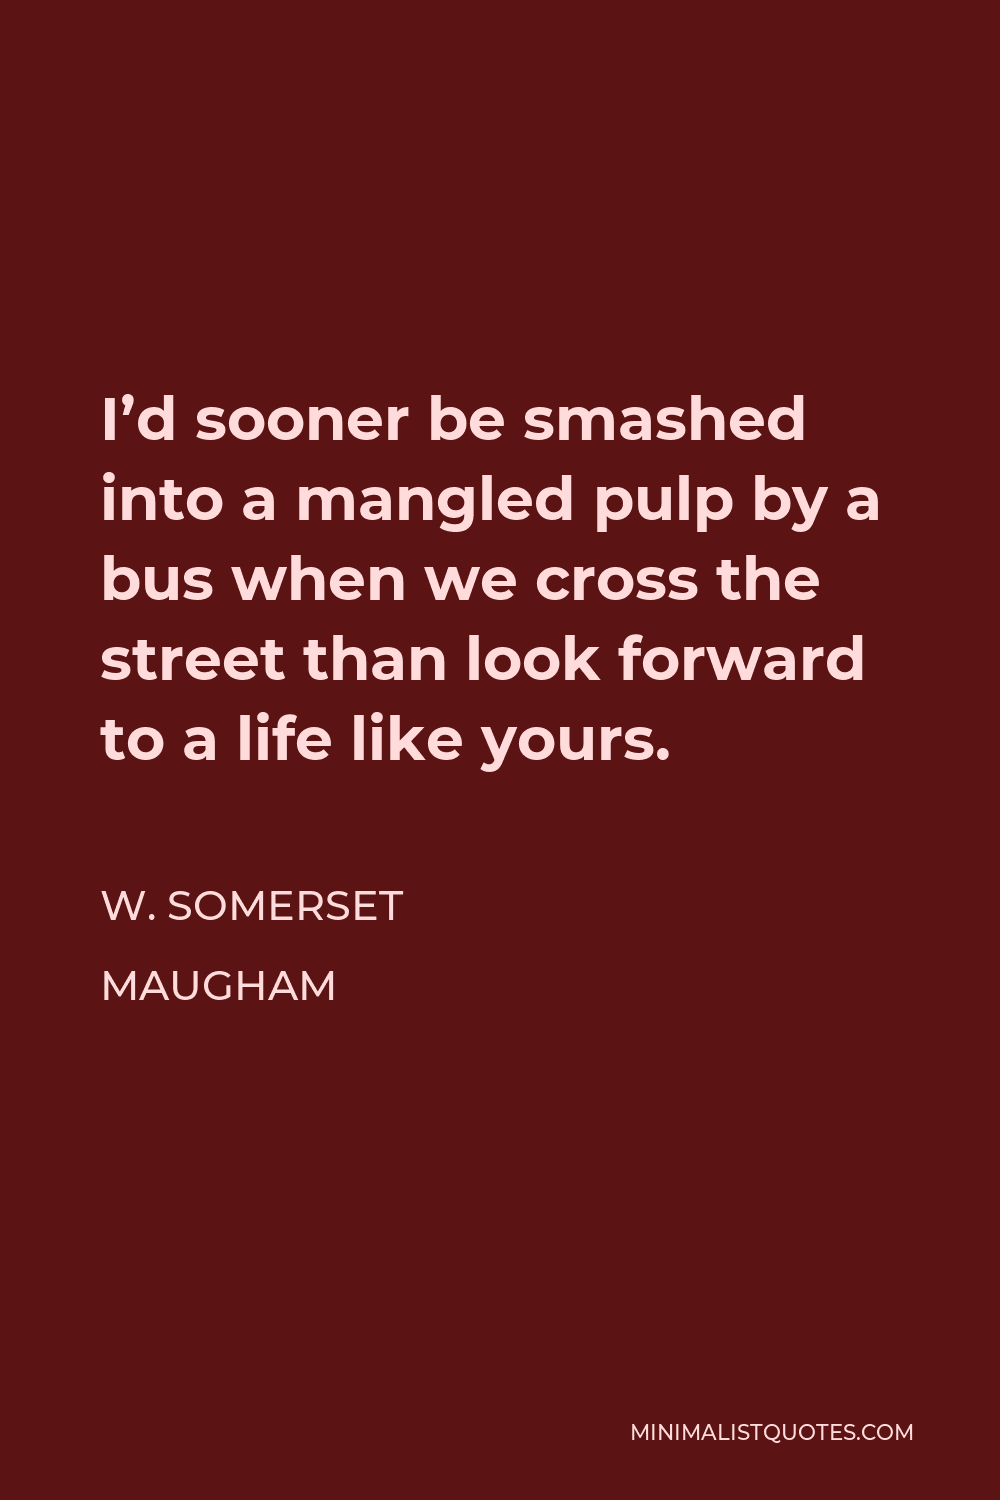 W. Somerset Maugham Quote - I’d sooner be smashed into a mangled pulp by a bus when we cross the street than look forward to a life like yours.